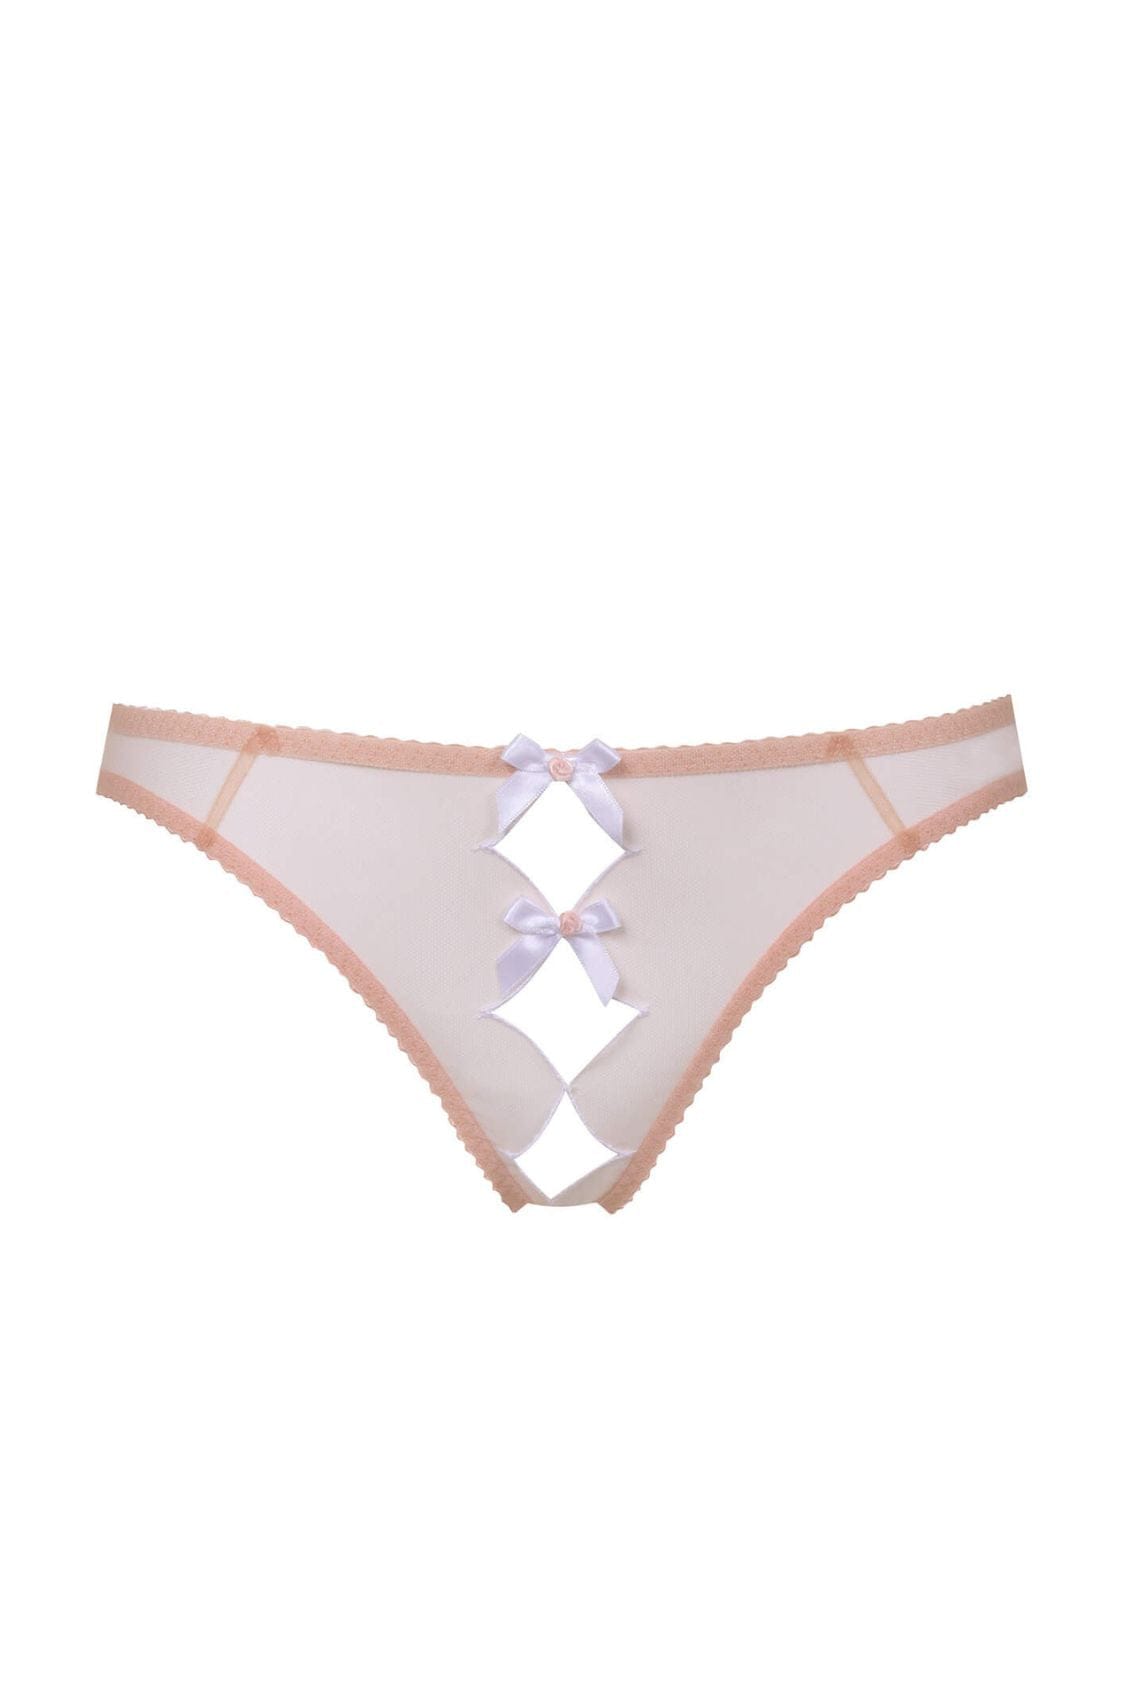 Agent Provocateur Panty Lorna Ouvert - Sand/White